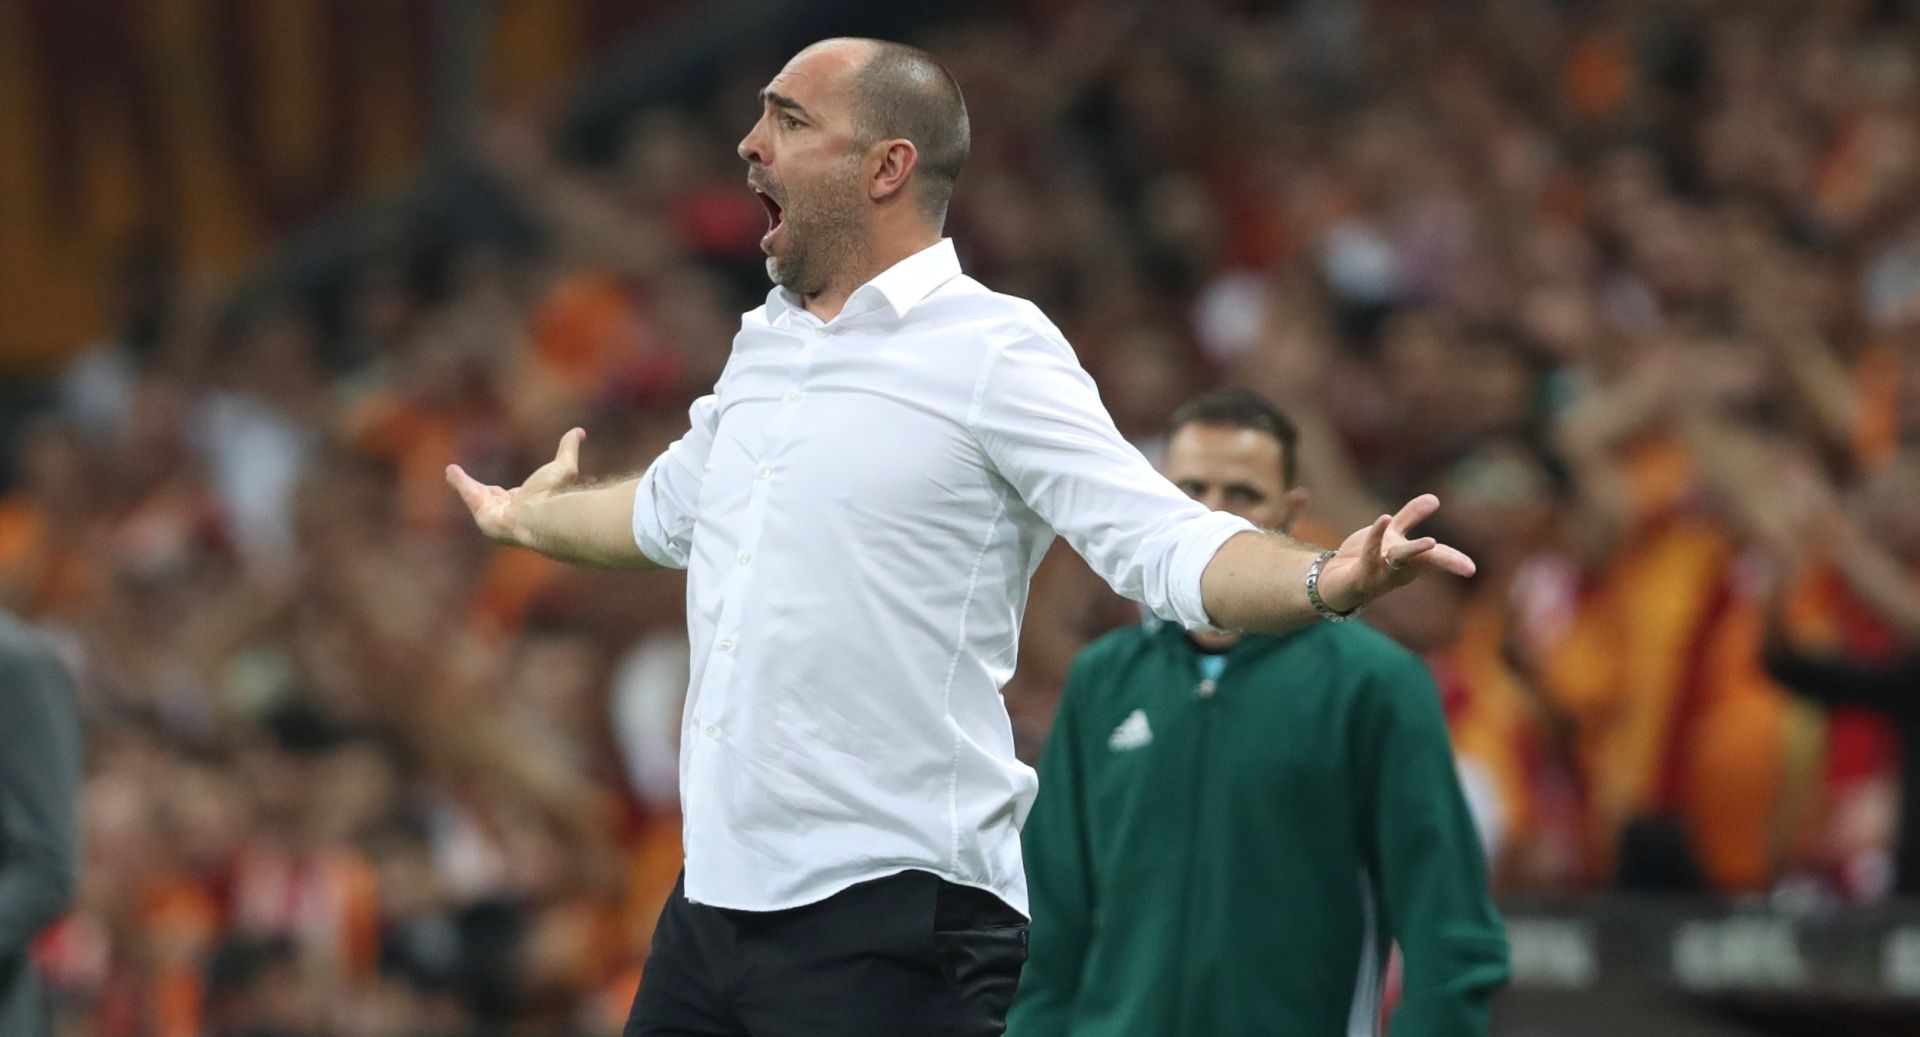 epa06099602 Galatasaray's head coach Igor Tudor gestures on the touchline during the UEFA Europa League second qualifying round second leg match between Galatasaray vs Ostersunds in Istanbul, Turkey 20 July 2017.  EPA/TOLGA BOZOGLU